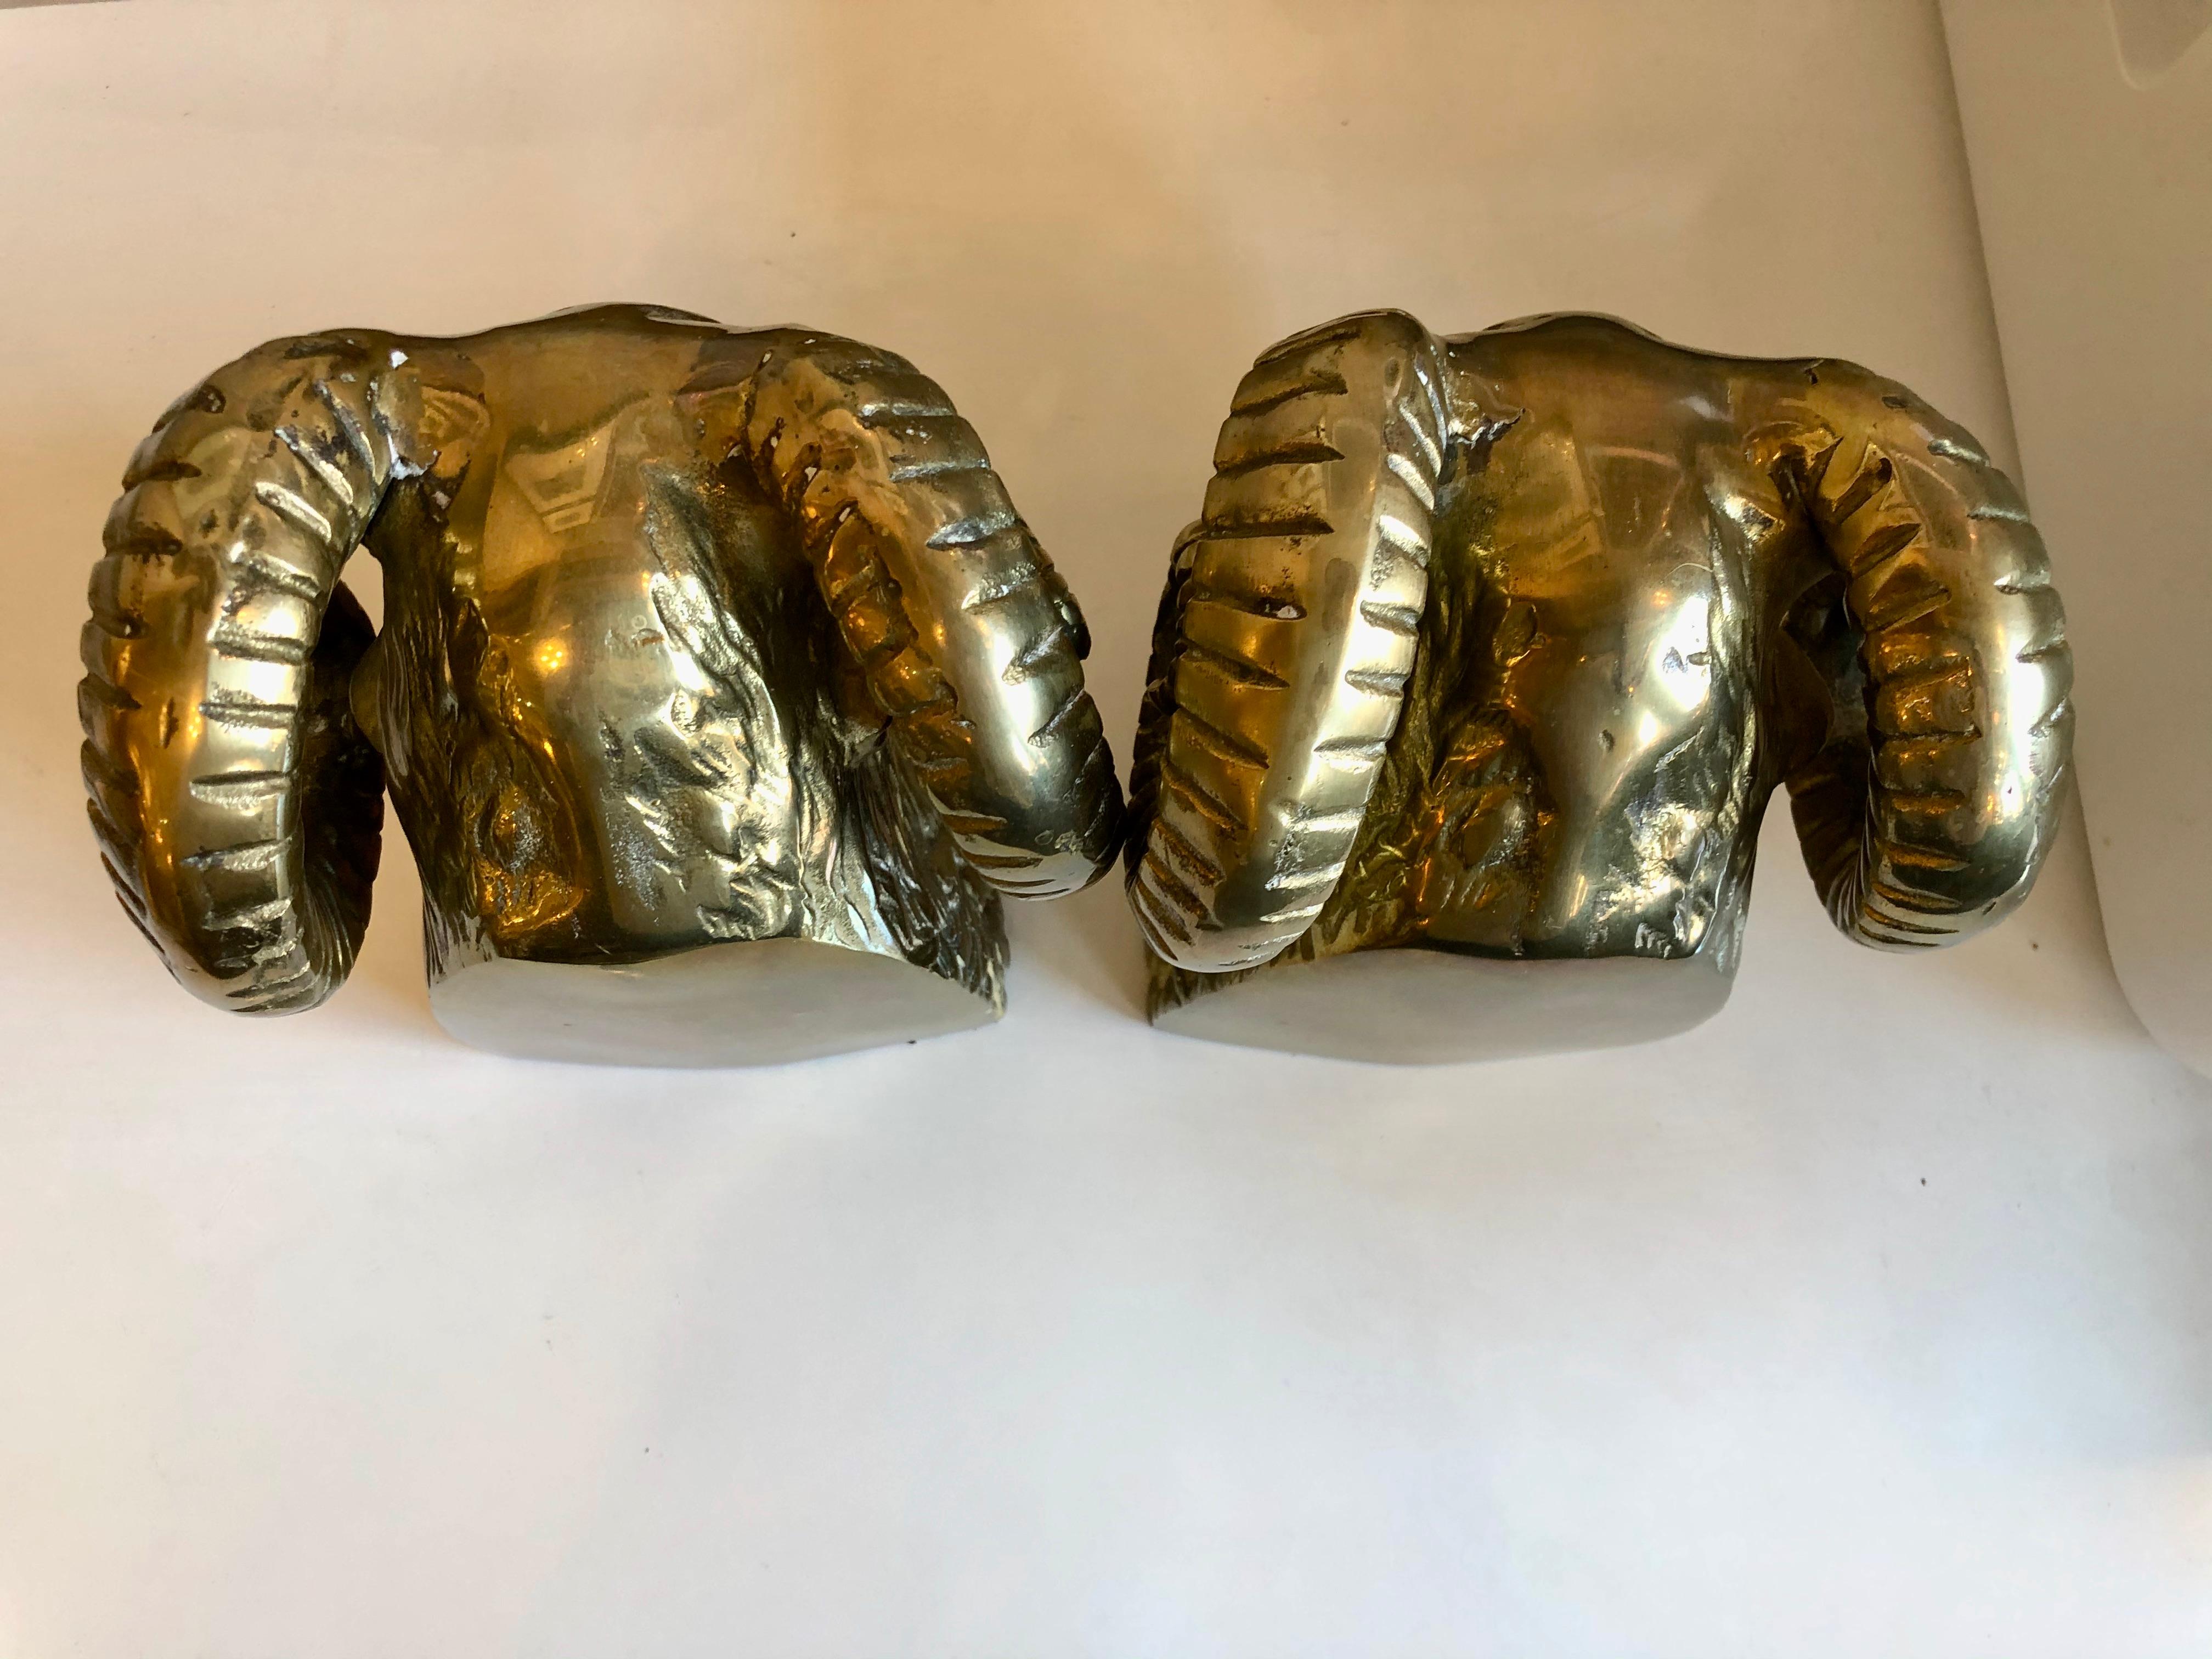 Mid-20th century heavy solid brass rams head bookends.